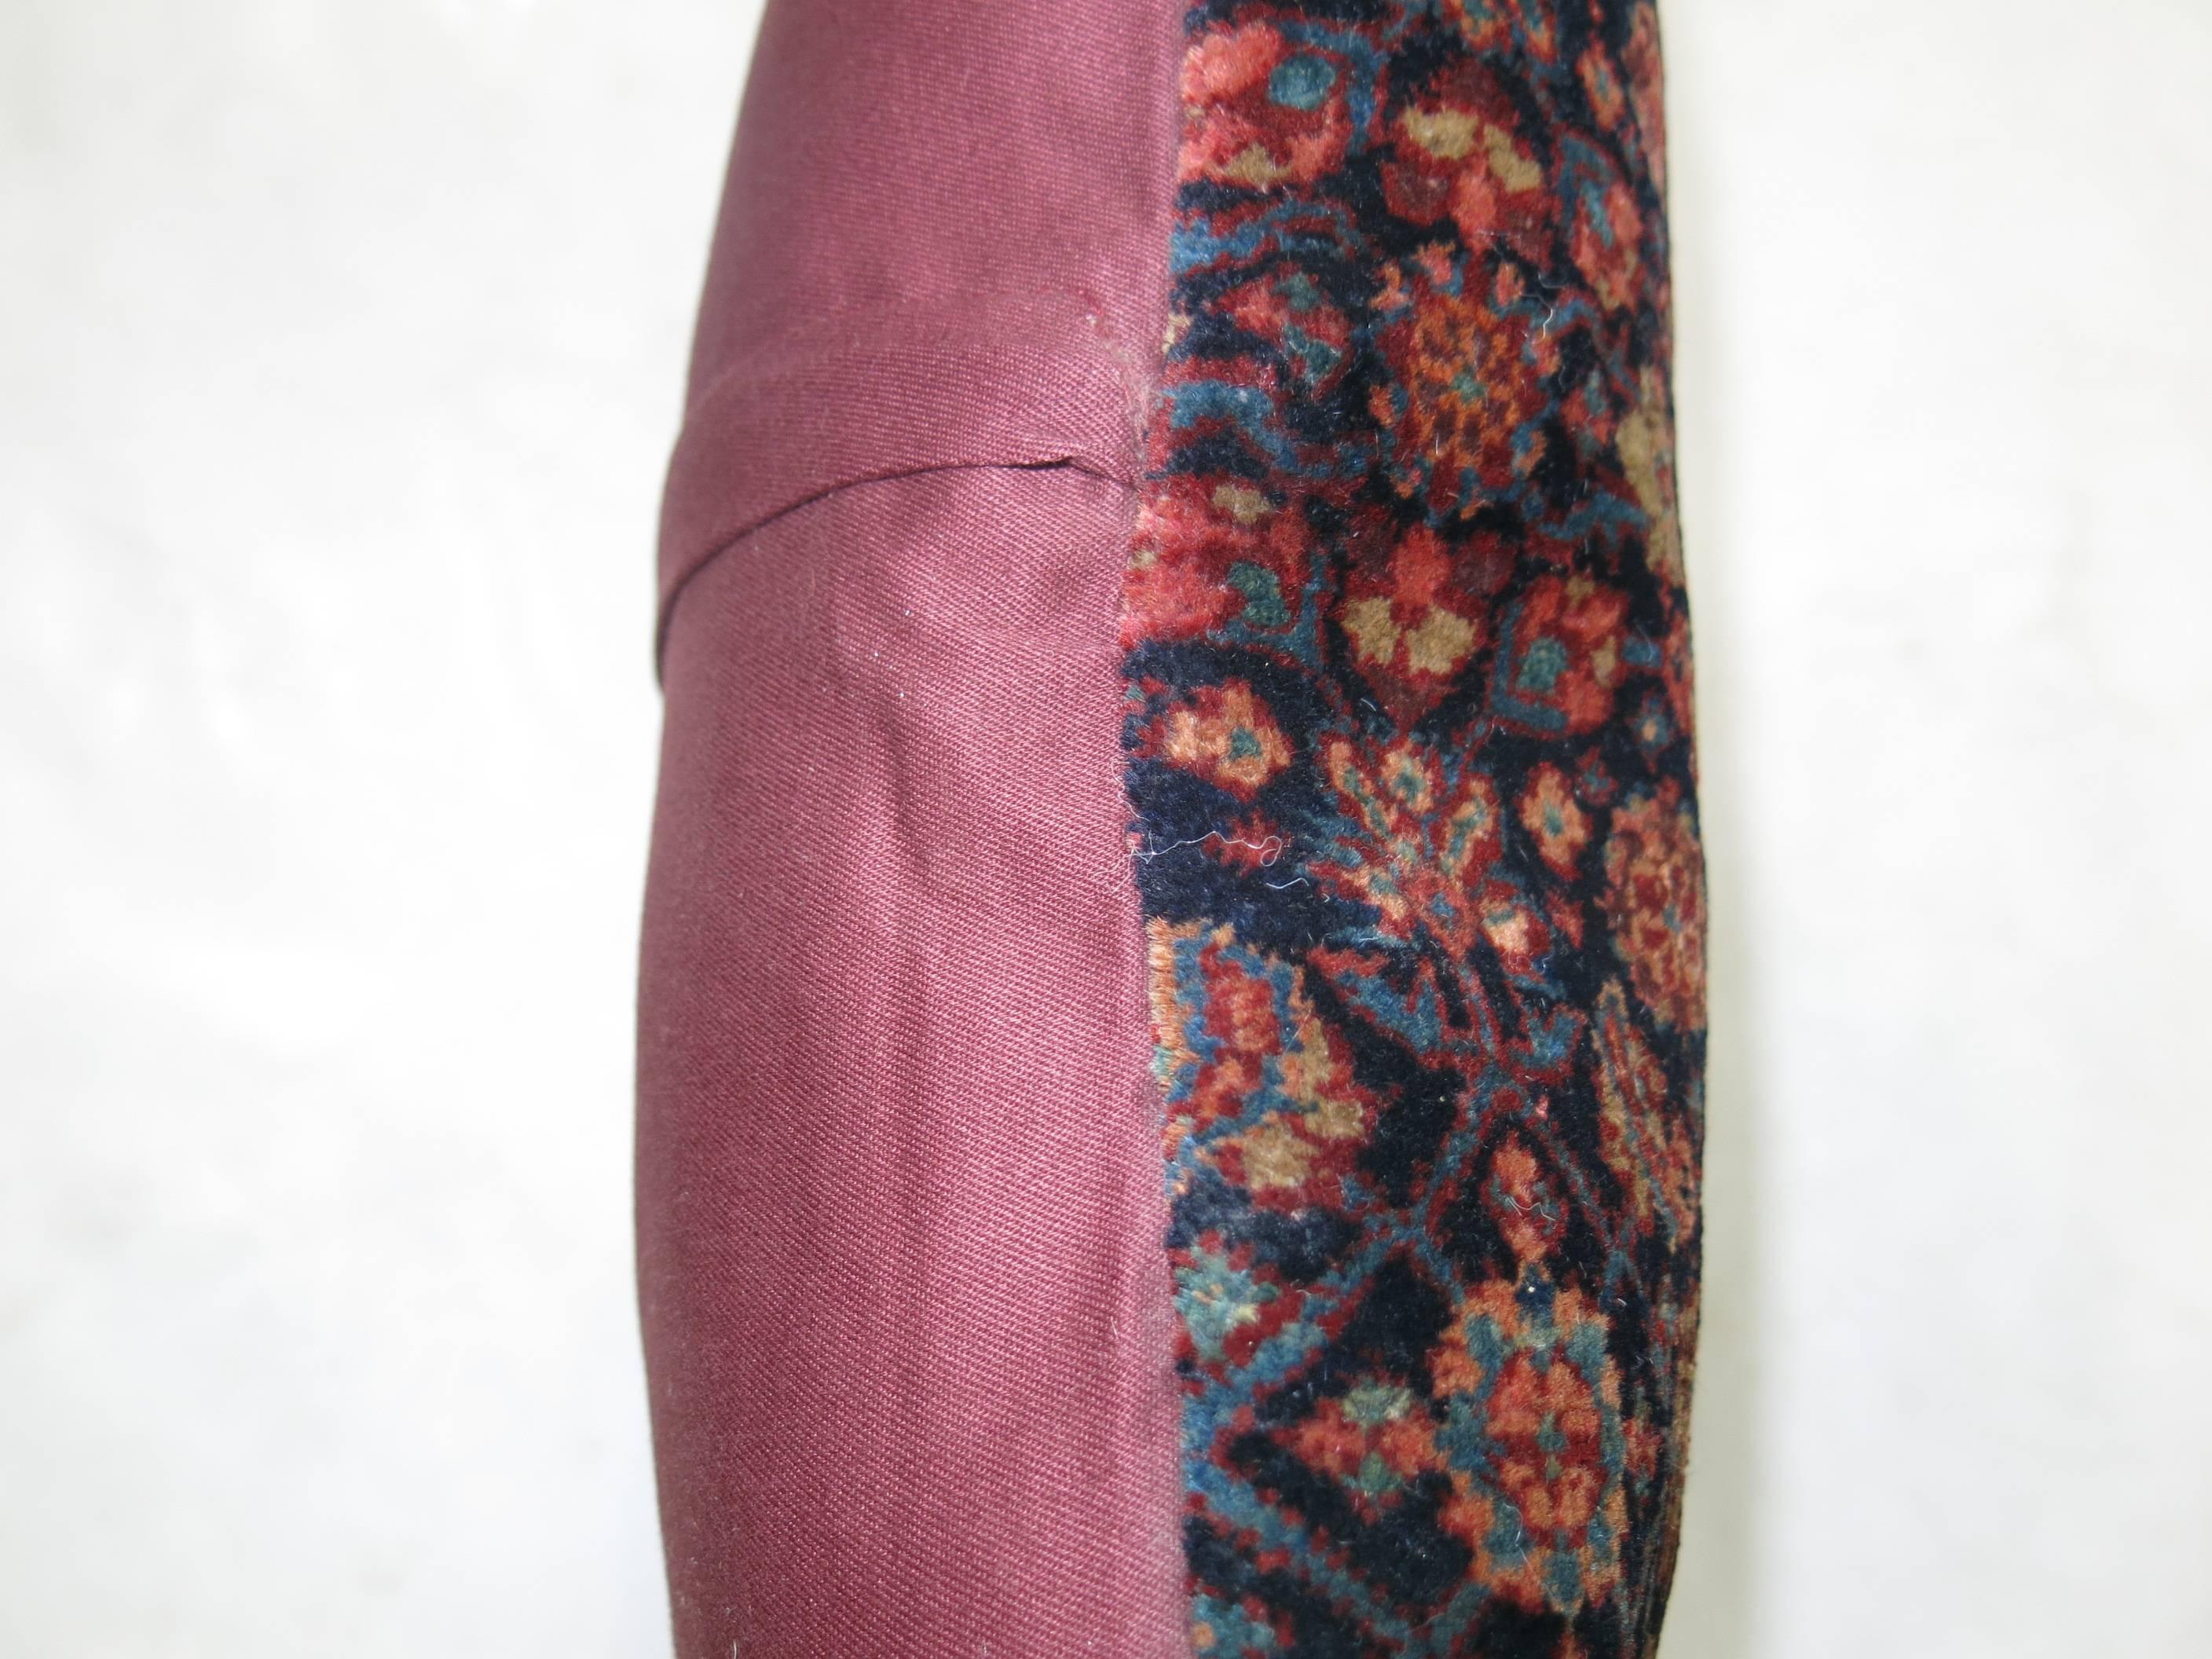 Pillow made from a vintage Persian rug backed in pink cotton.